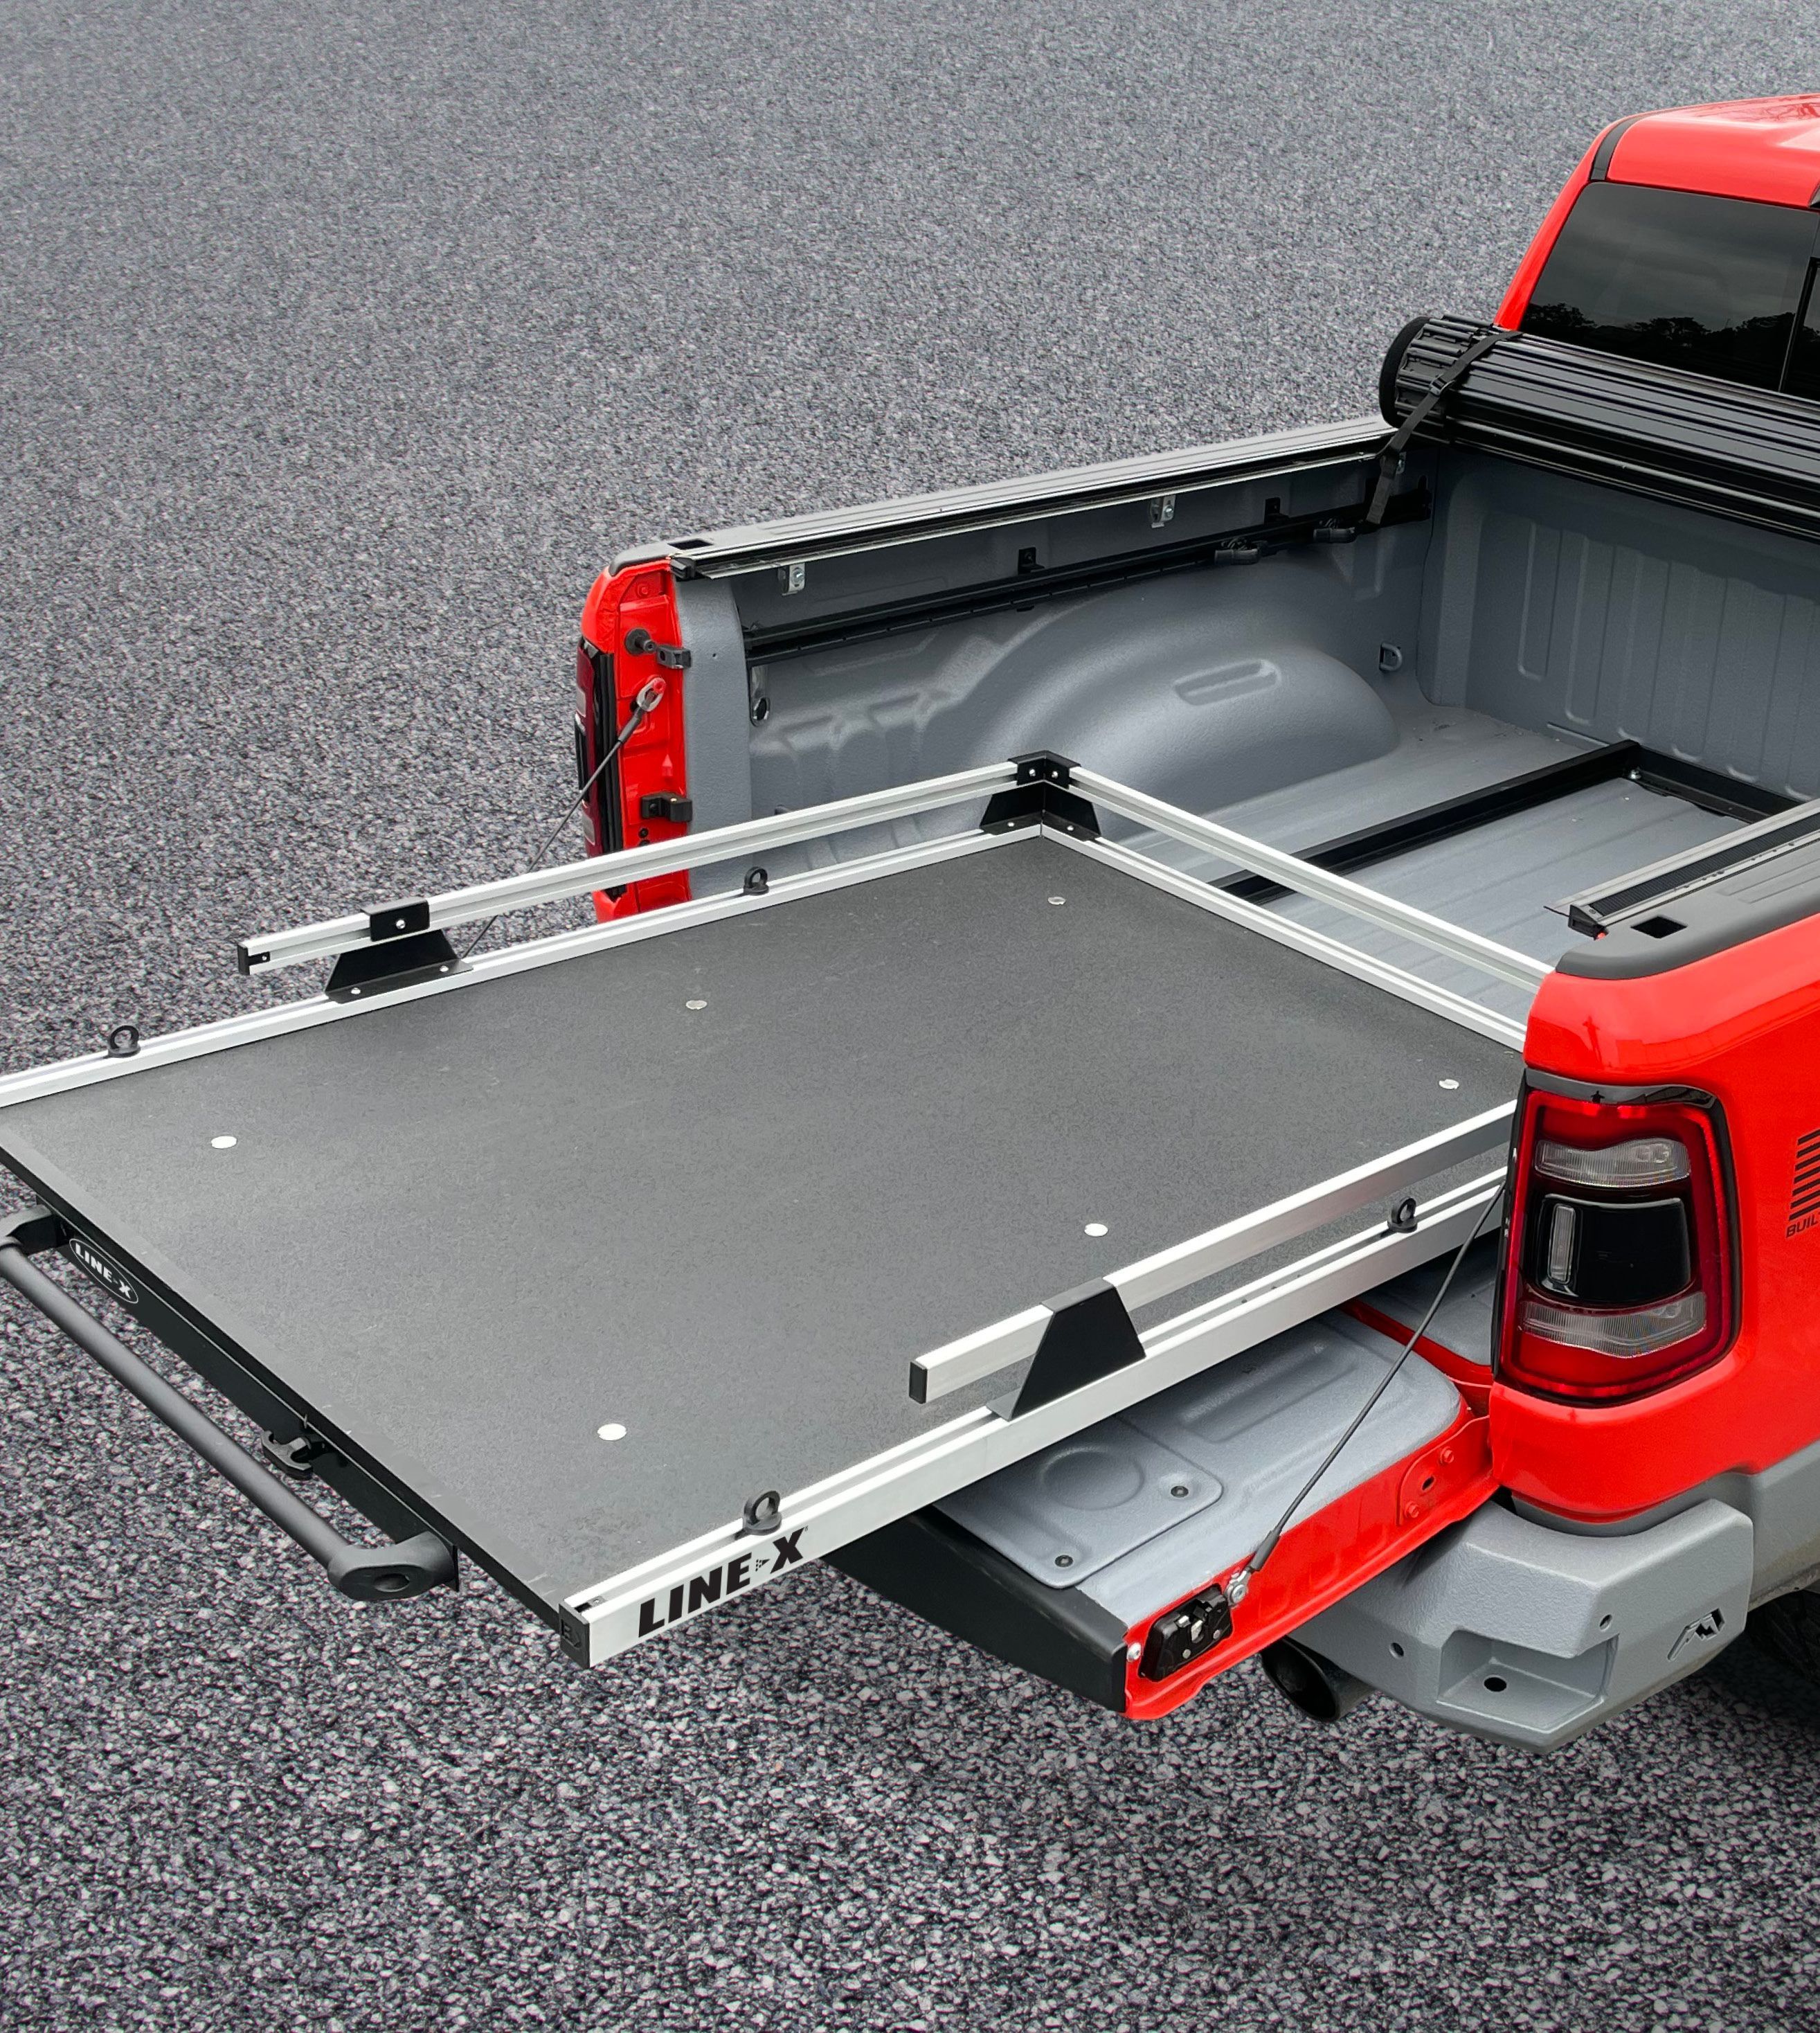 bed liner whole jeep - Google Search  Truck bed liner paint, Truck bed  liner, Bed liner paint